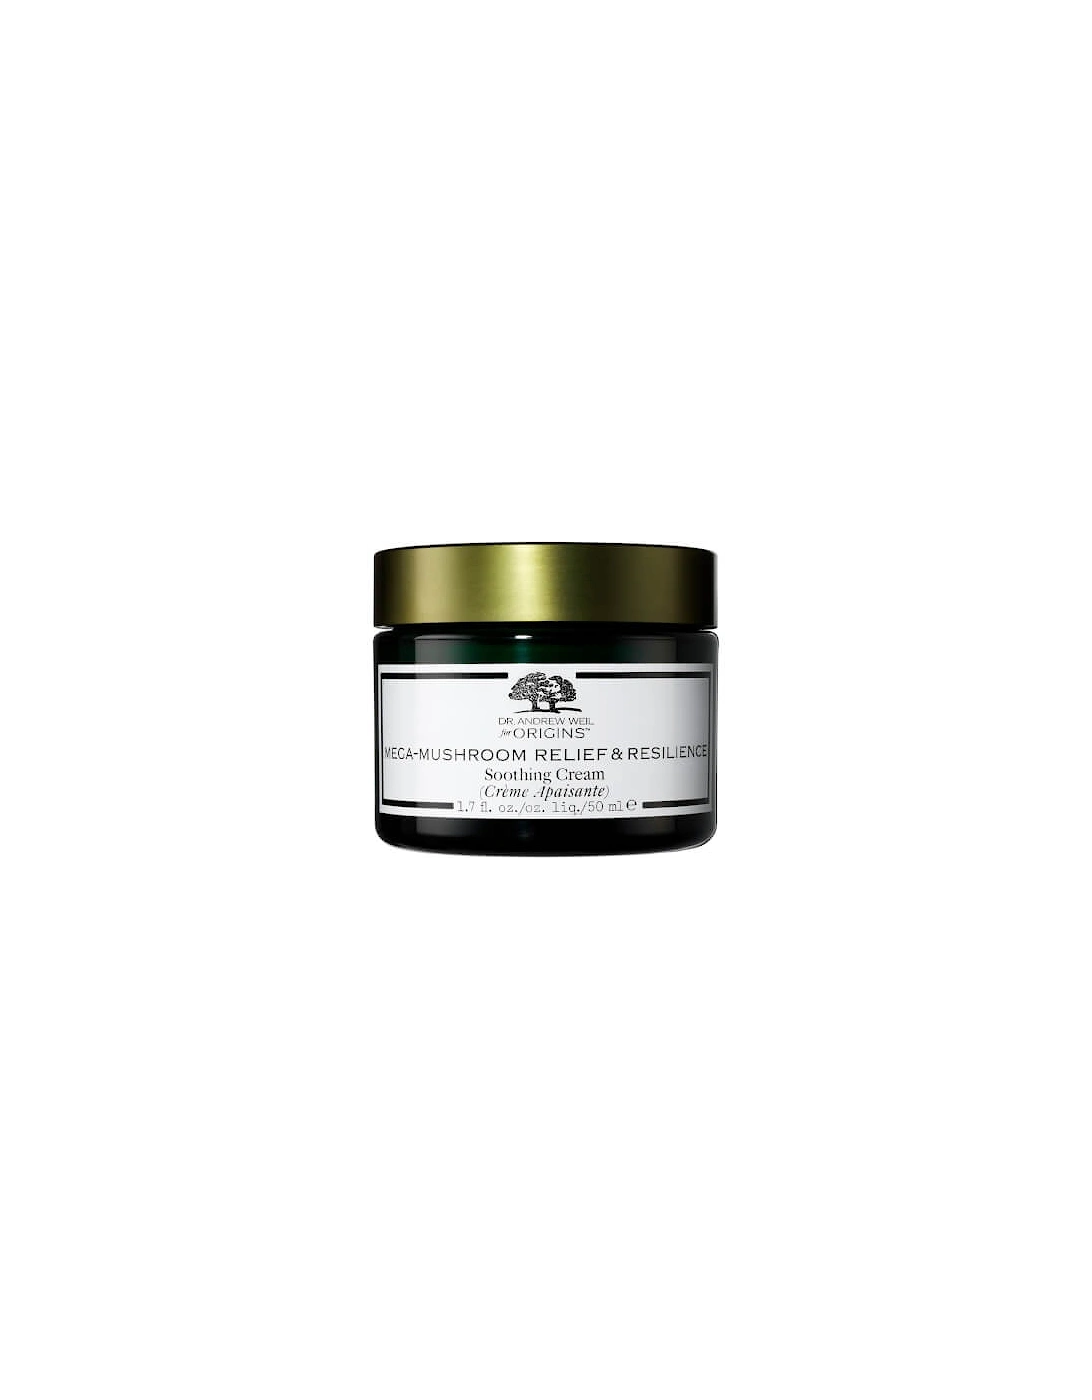 Dr. Andrew Weil for Exclusive Mega-Mushroom Relief & Resilience Cream Upgrade 50ml, 2 of 1